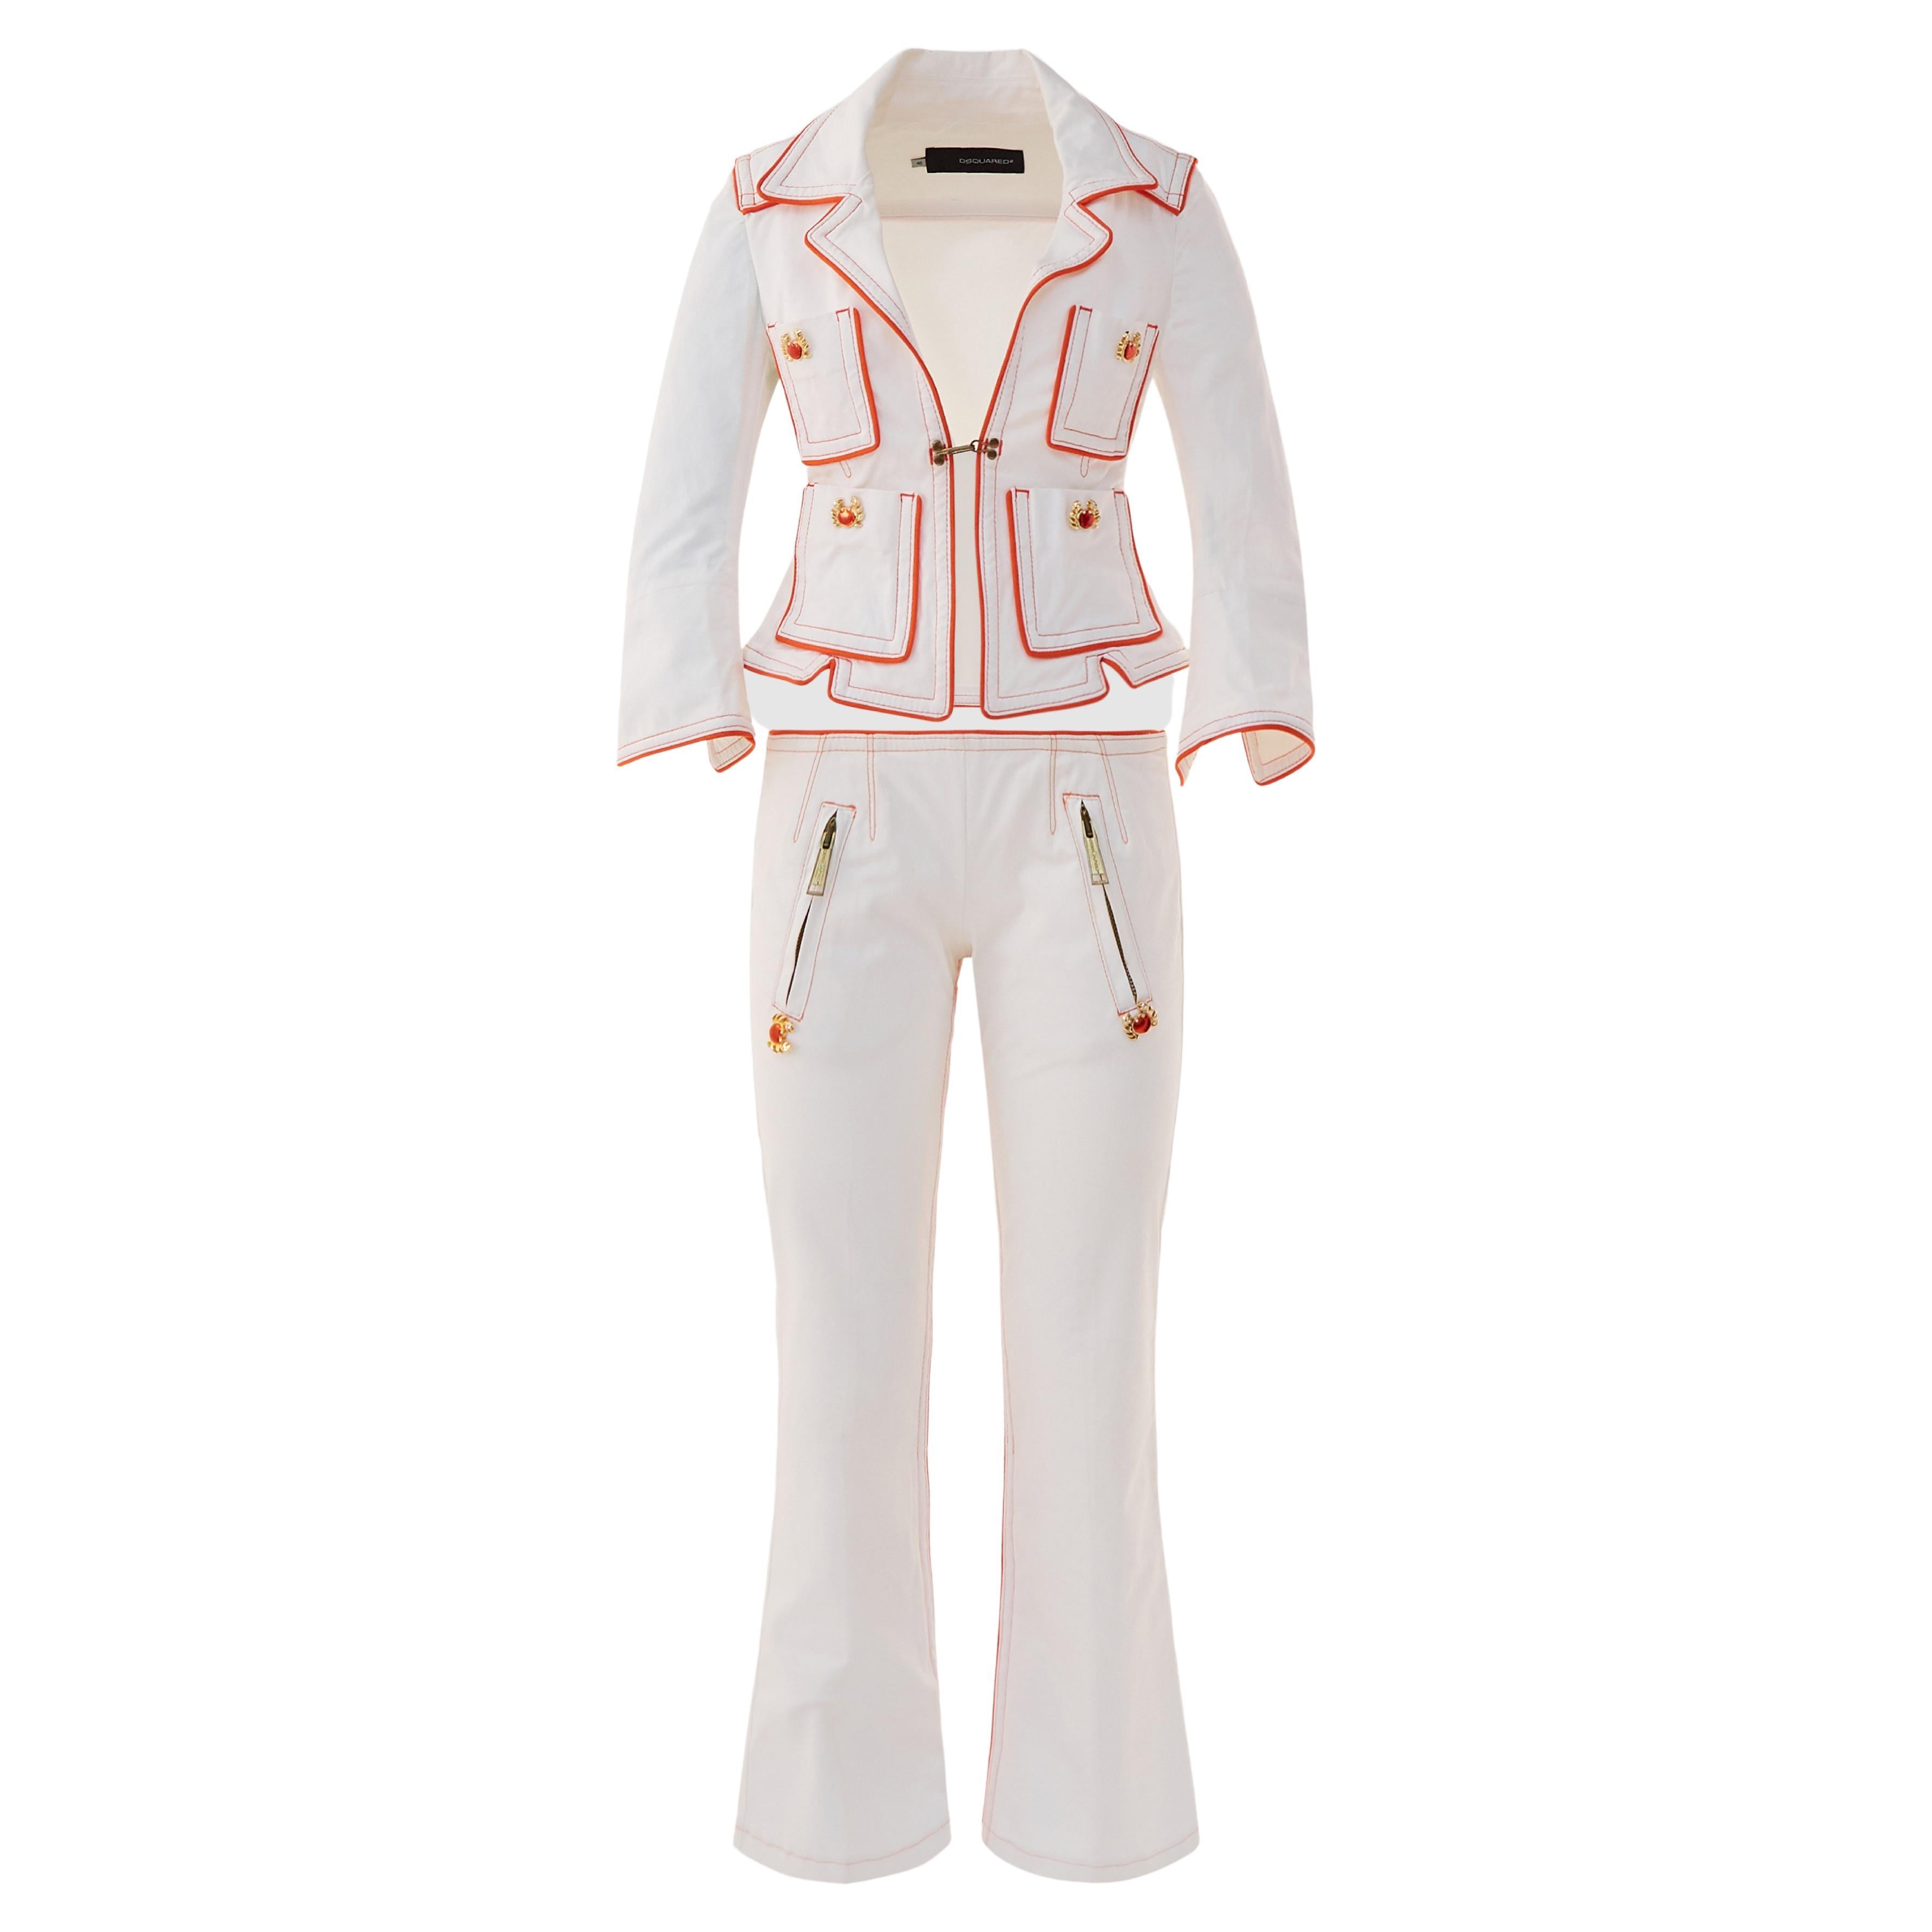 Dsquared2 S/S 2005 embellished gold crabs sailor-style suit